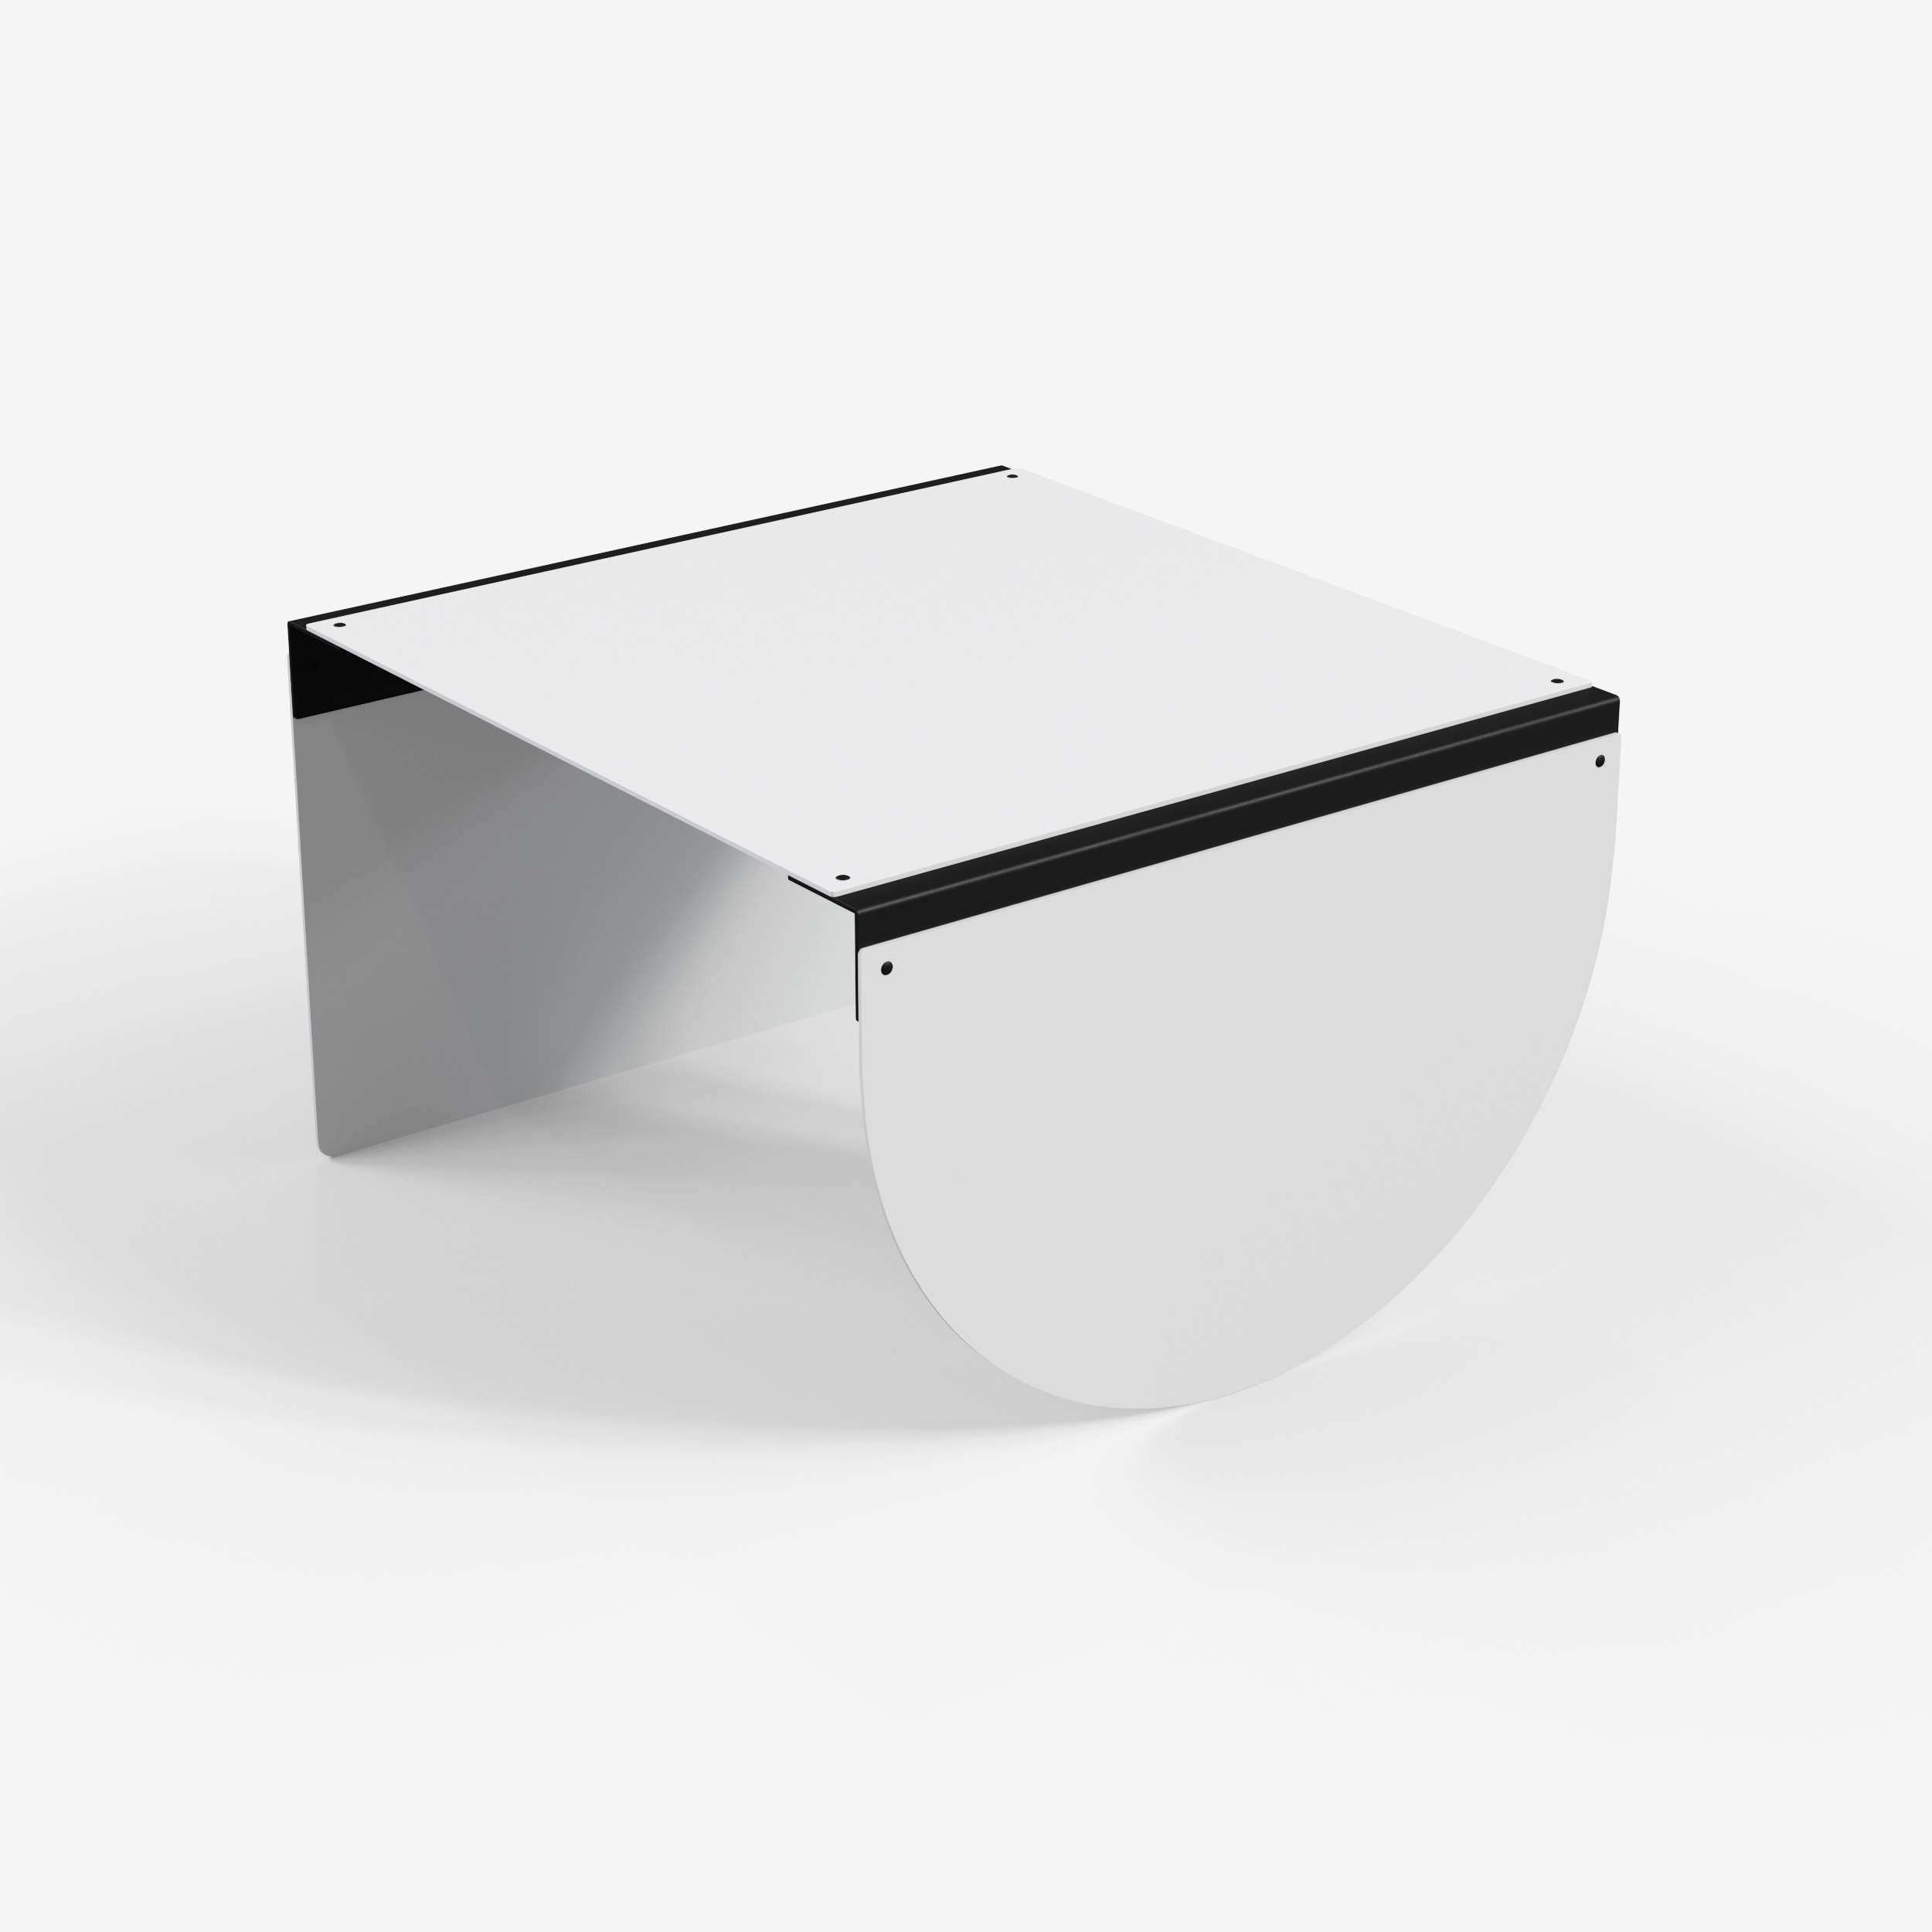 Connect - Coffee Table / XL (Round, White)